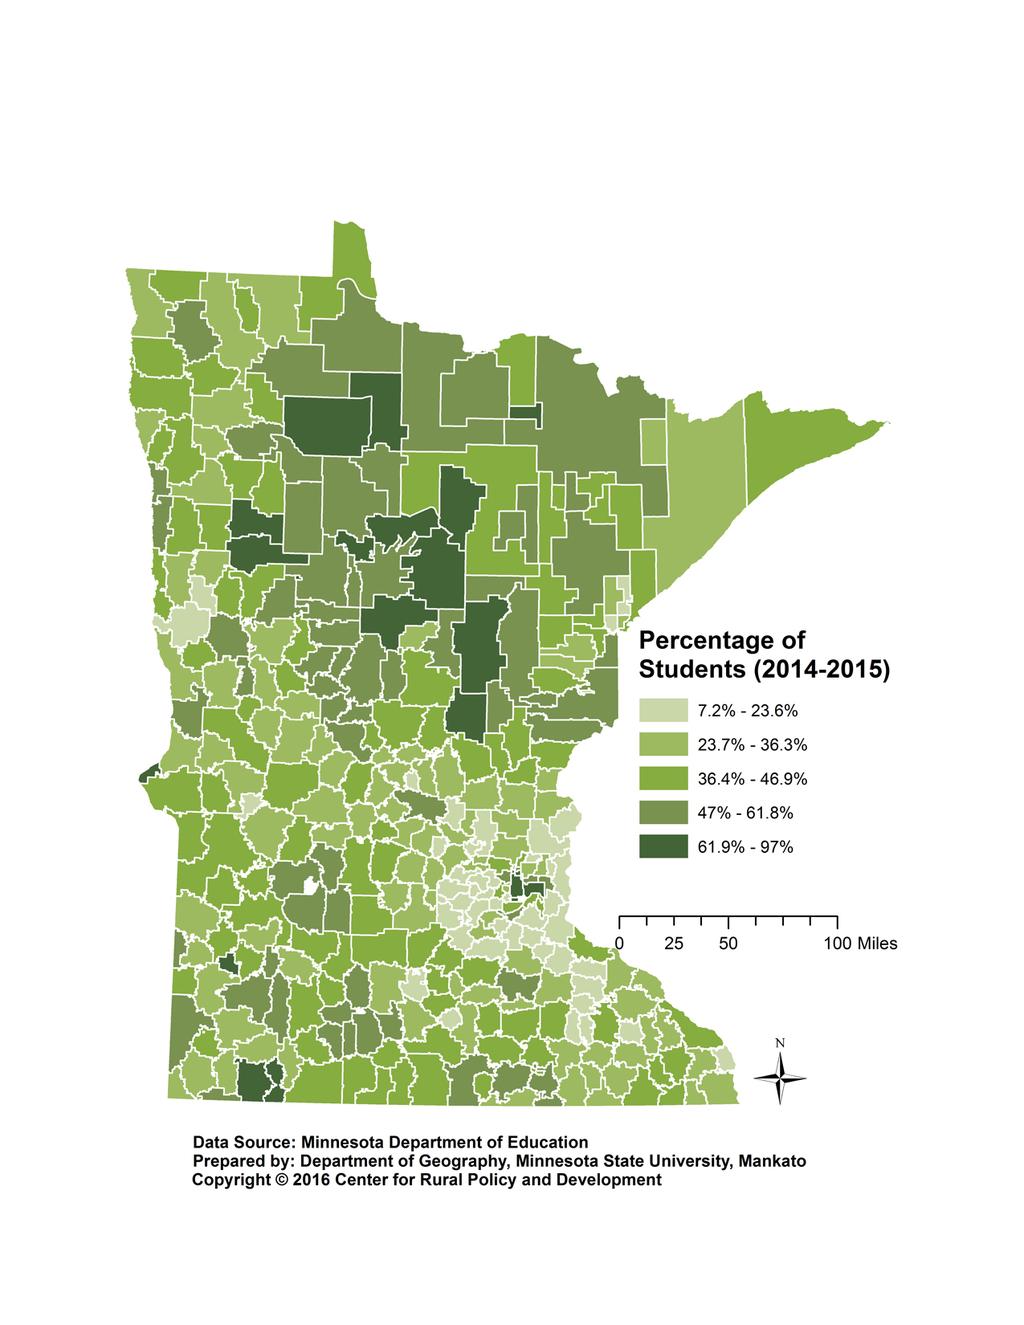 Free lunch eligibility, 2014-2015 For the state of Minnesota, 39% of students were eligible for free or reduced-price lunch in the 2014-2015 school